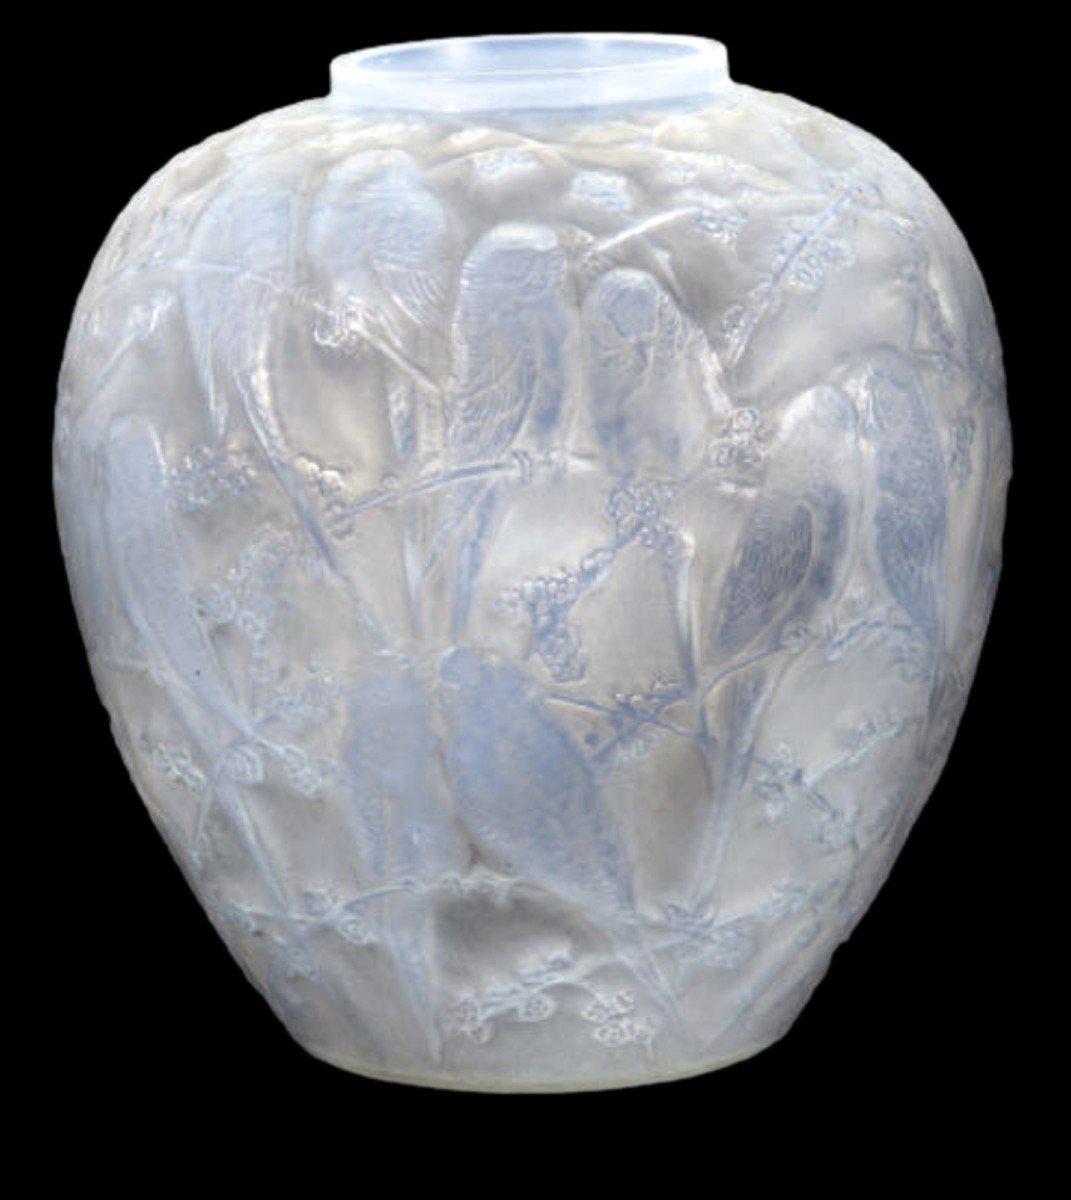  Opalescent pressed moulded glass.
Created in 1919 and discontinued in 1937 
Bibliography: Felix Marcilhac, 